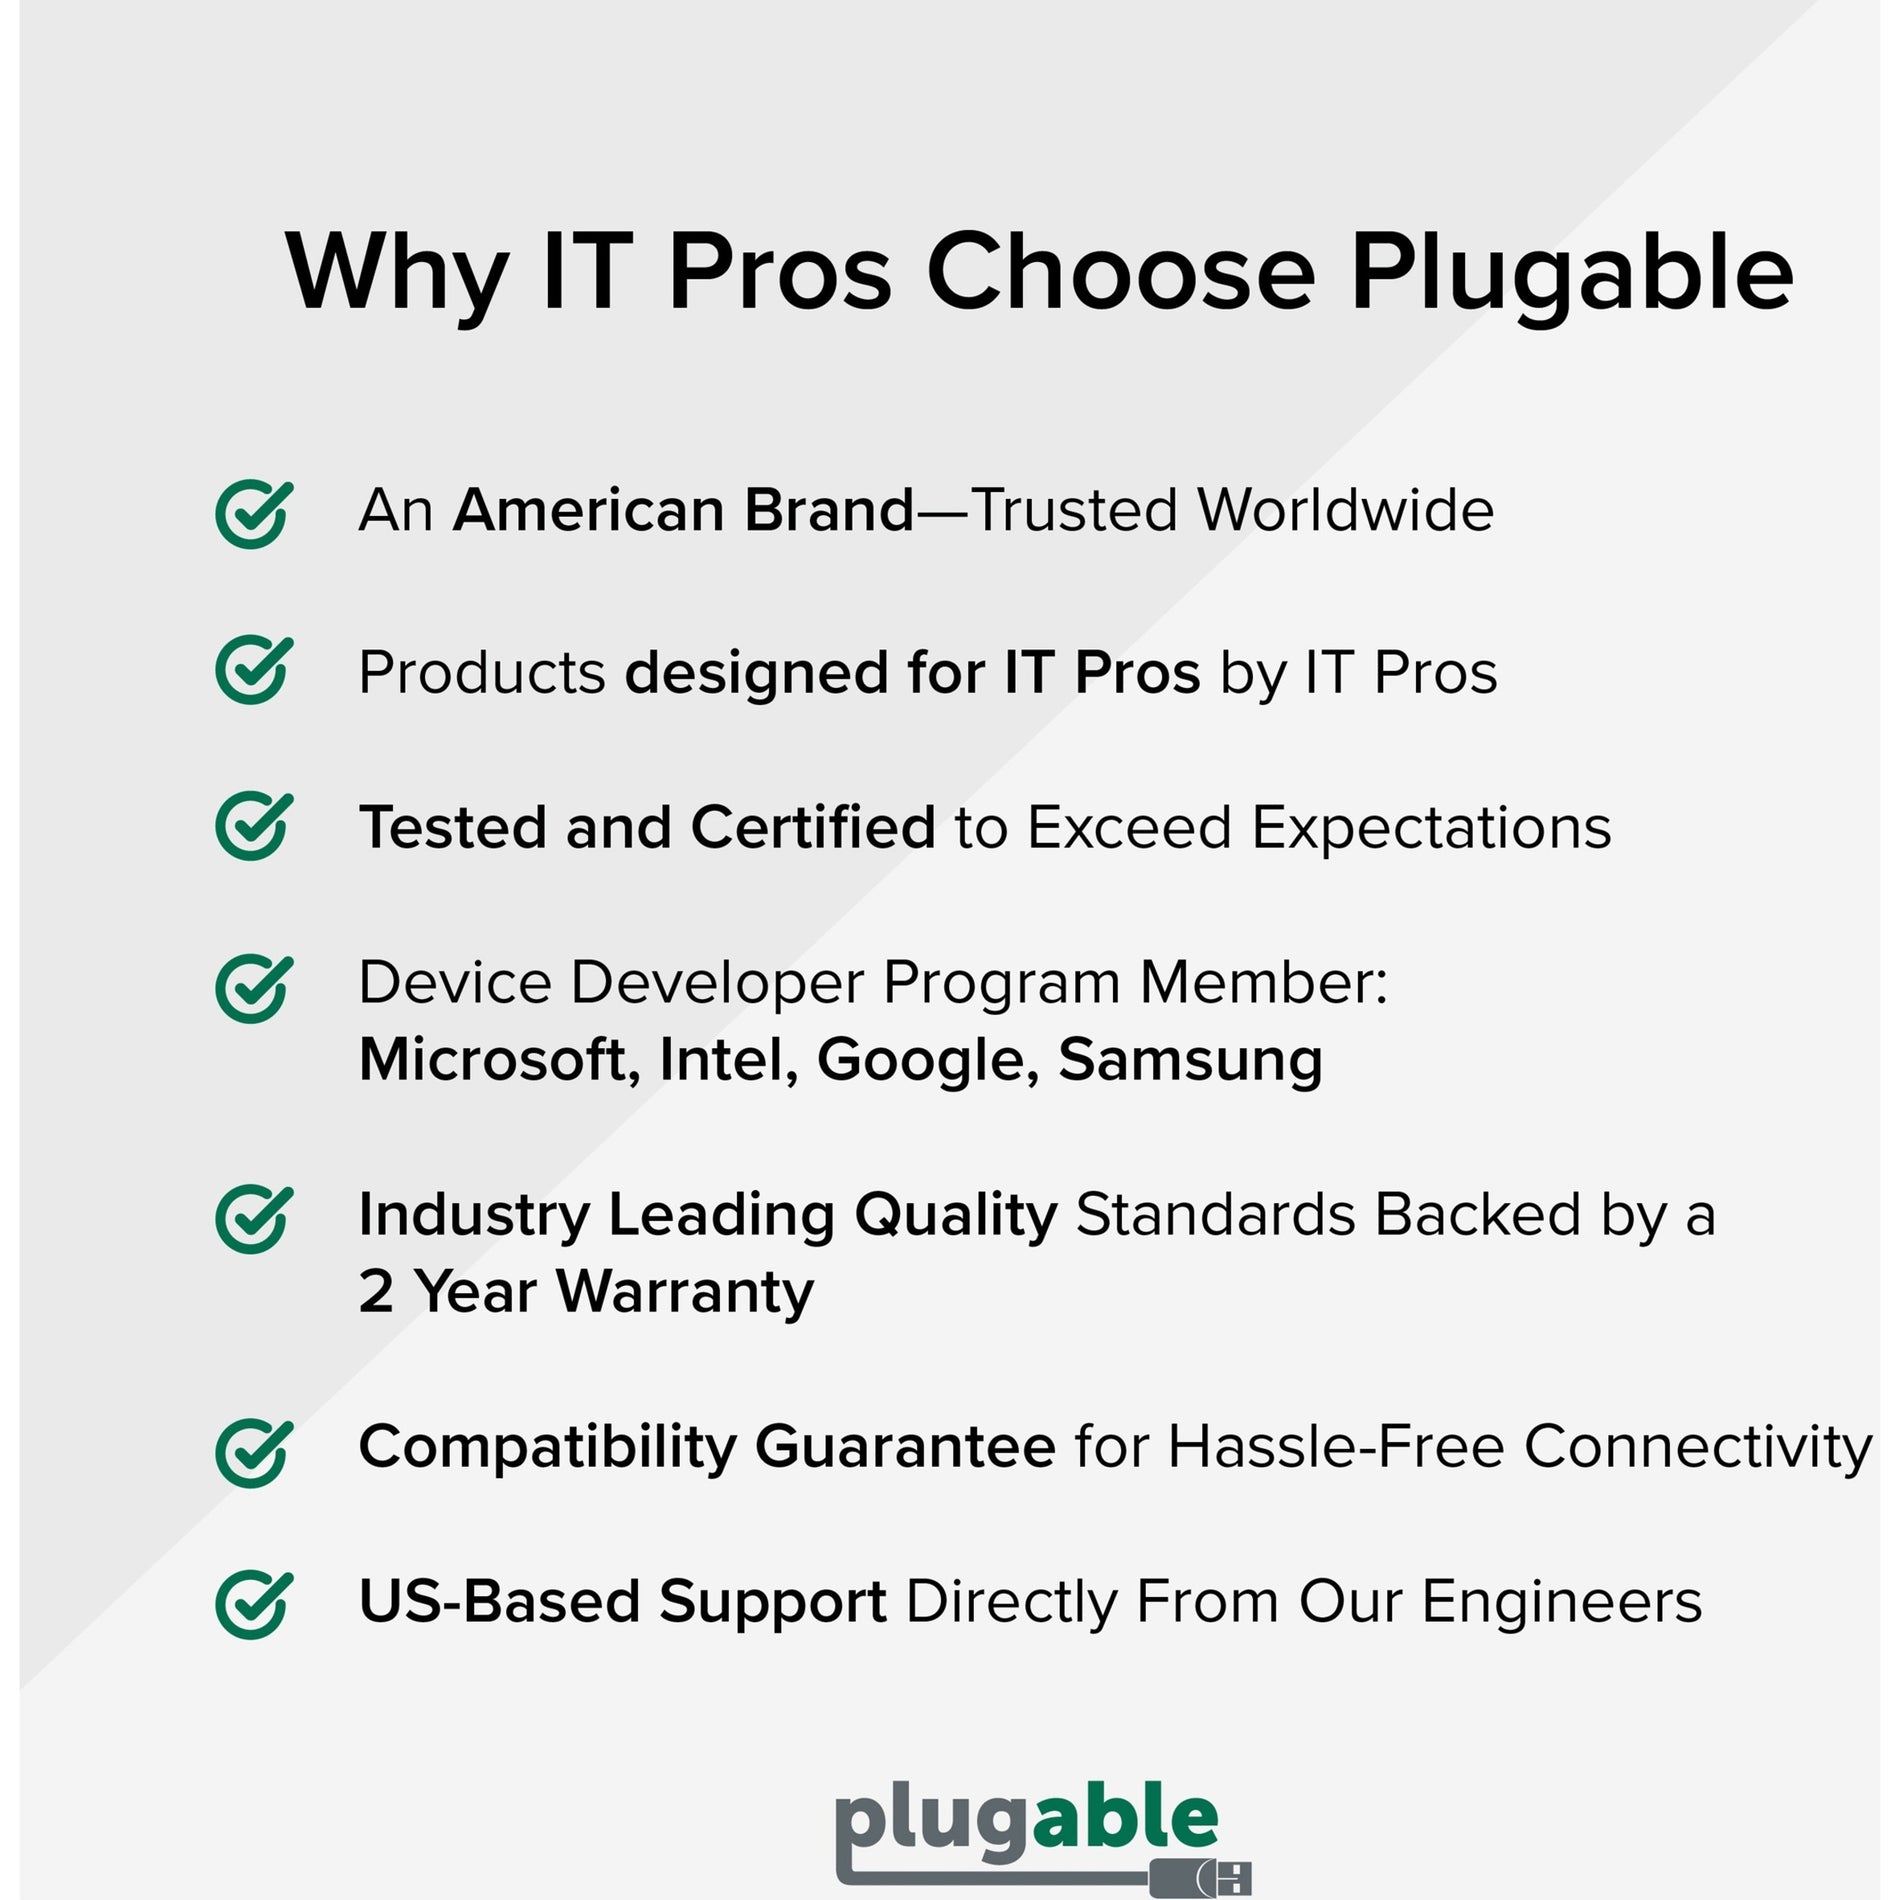 Plugable USB2-E100 USB 2.0 to Ethernet Fast 10/100 LAN Wired Network Adapter, Reliable and Convenient Internet Connection